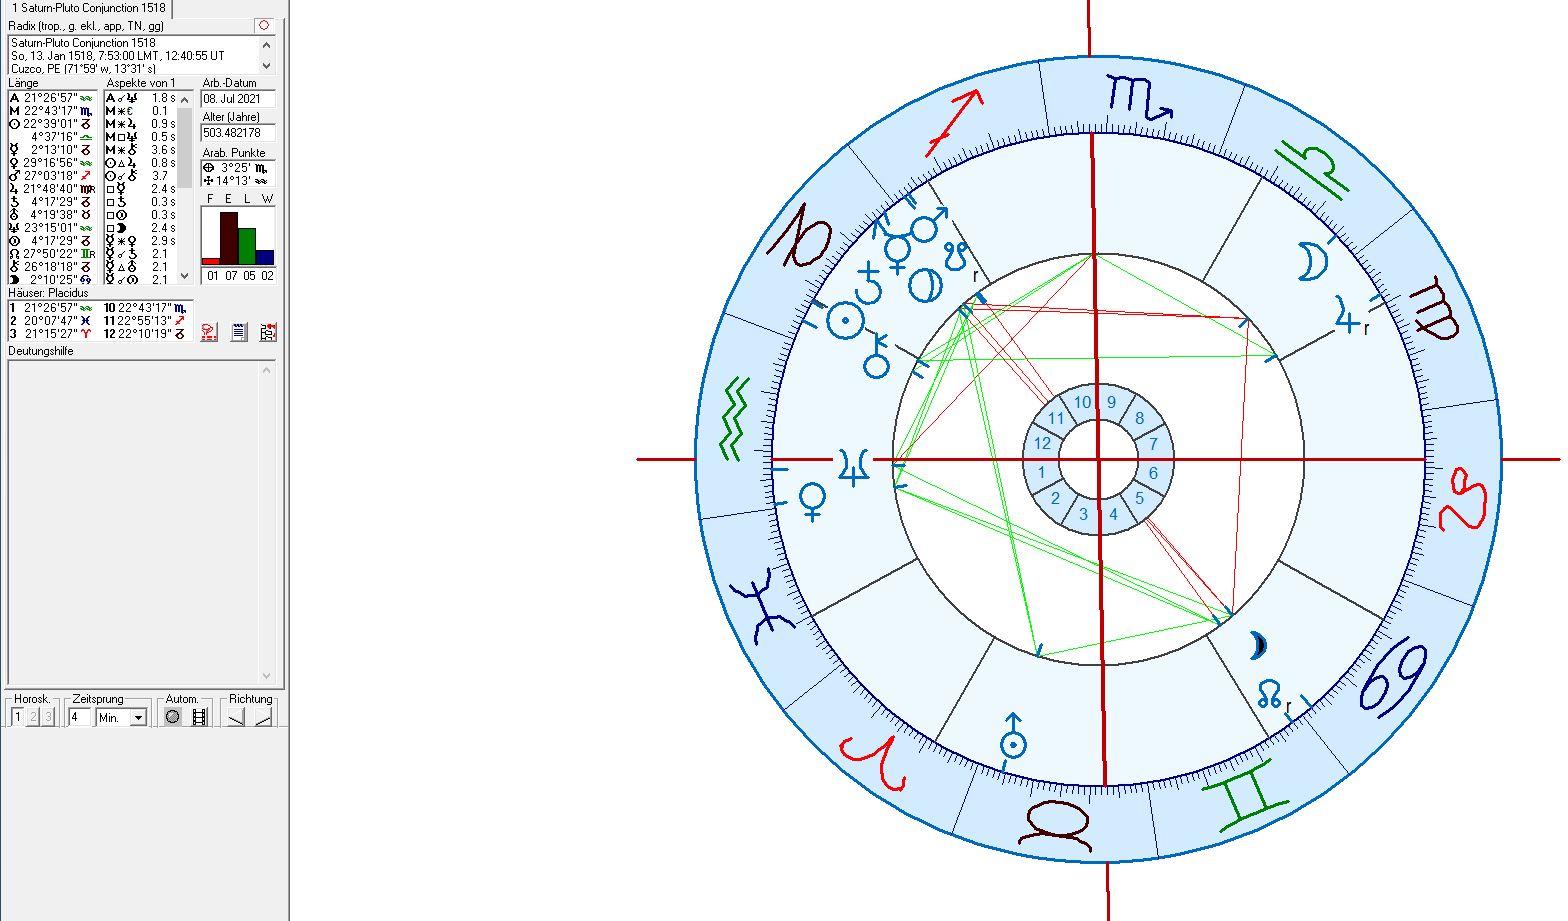 Astrological chart for the Pluto-Saturn conjunction of 13 January 1518 at 4...